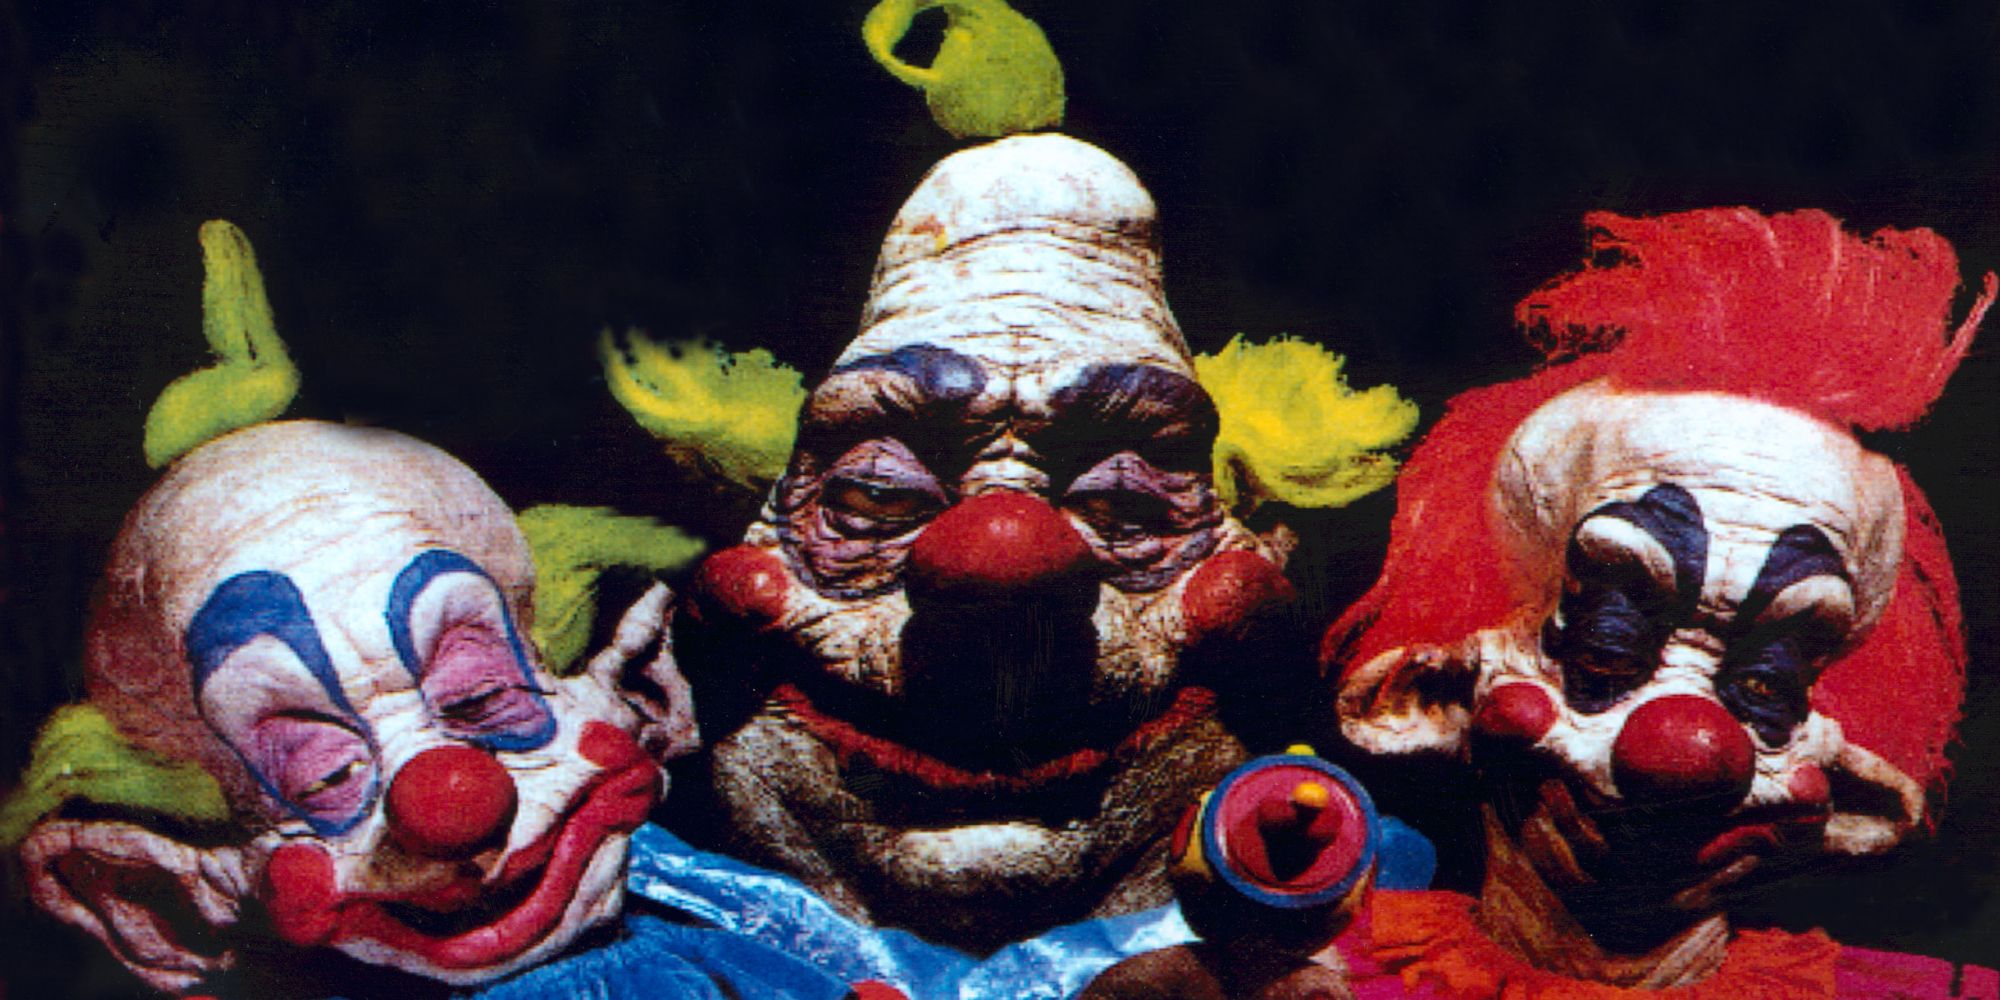 Still from the 1998 horror movie Killer Klowns from Outer Space.